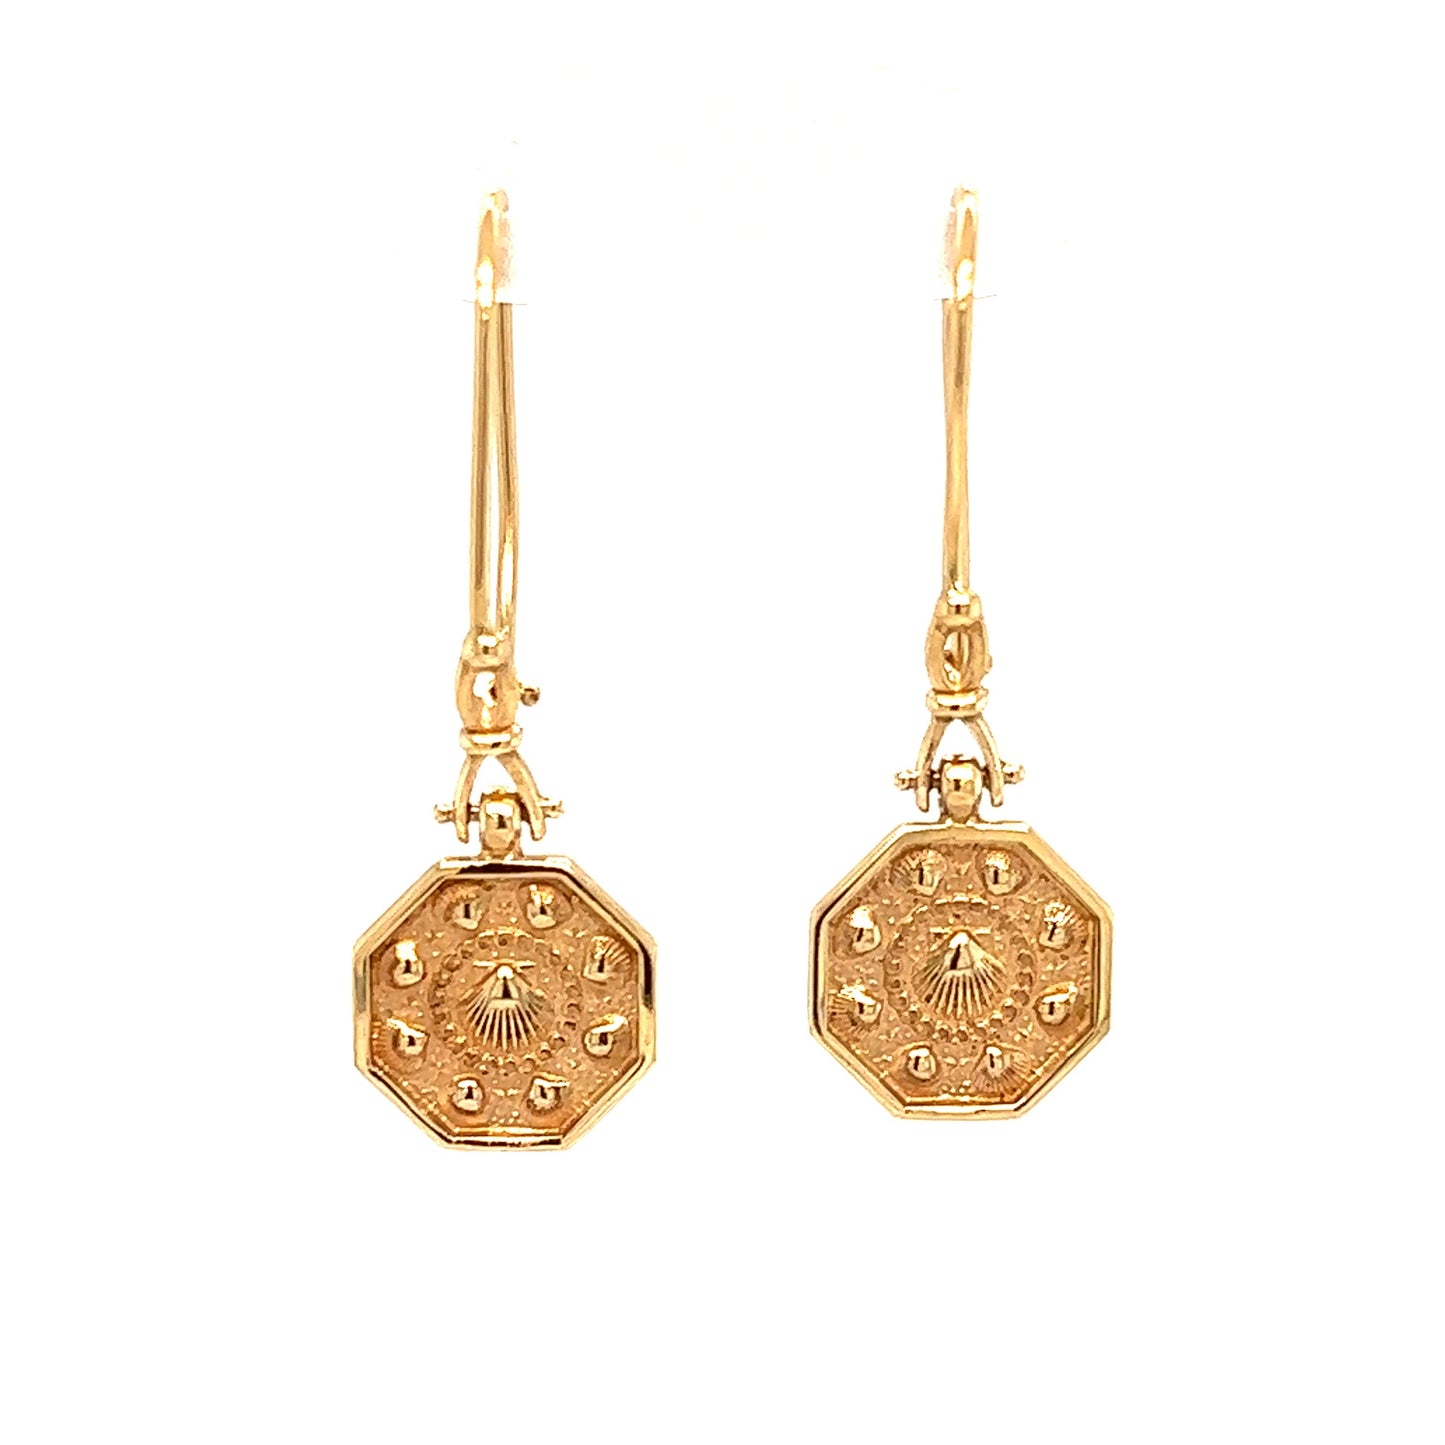 Sailor's Valentine Dangle Earrings in 14K Yellow Gold Front View